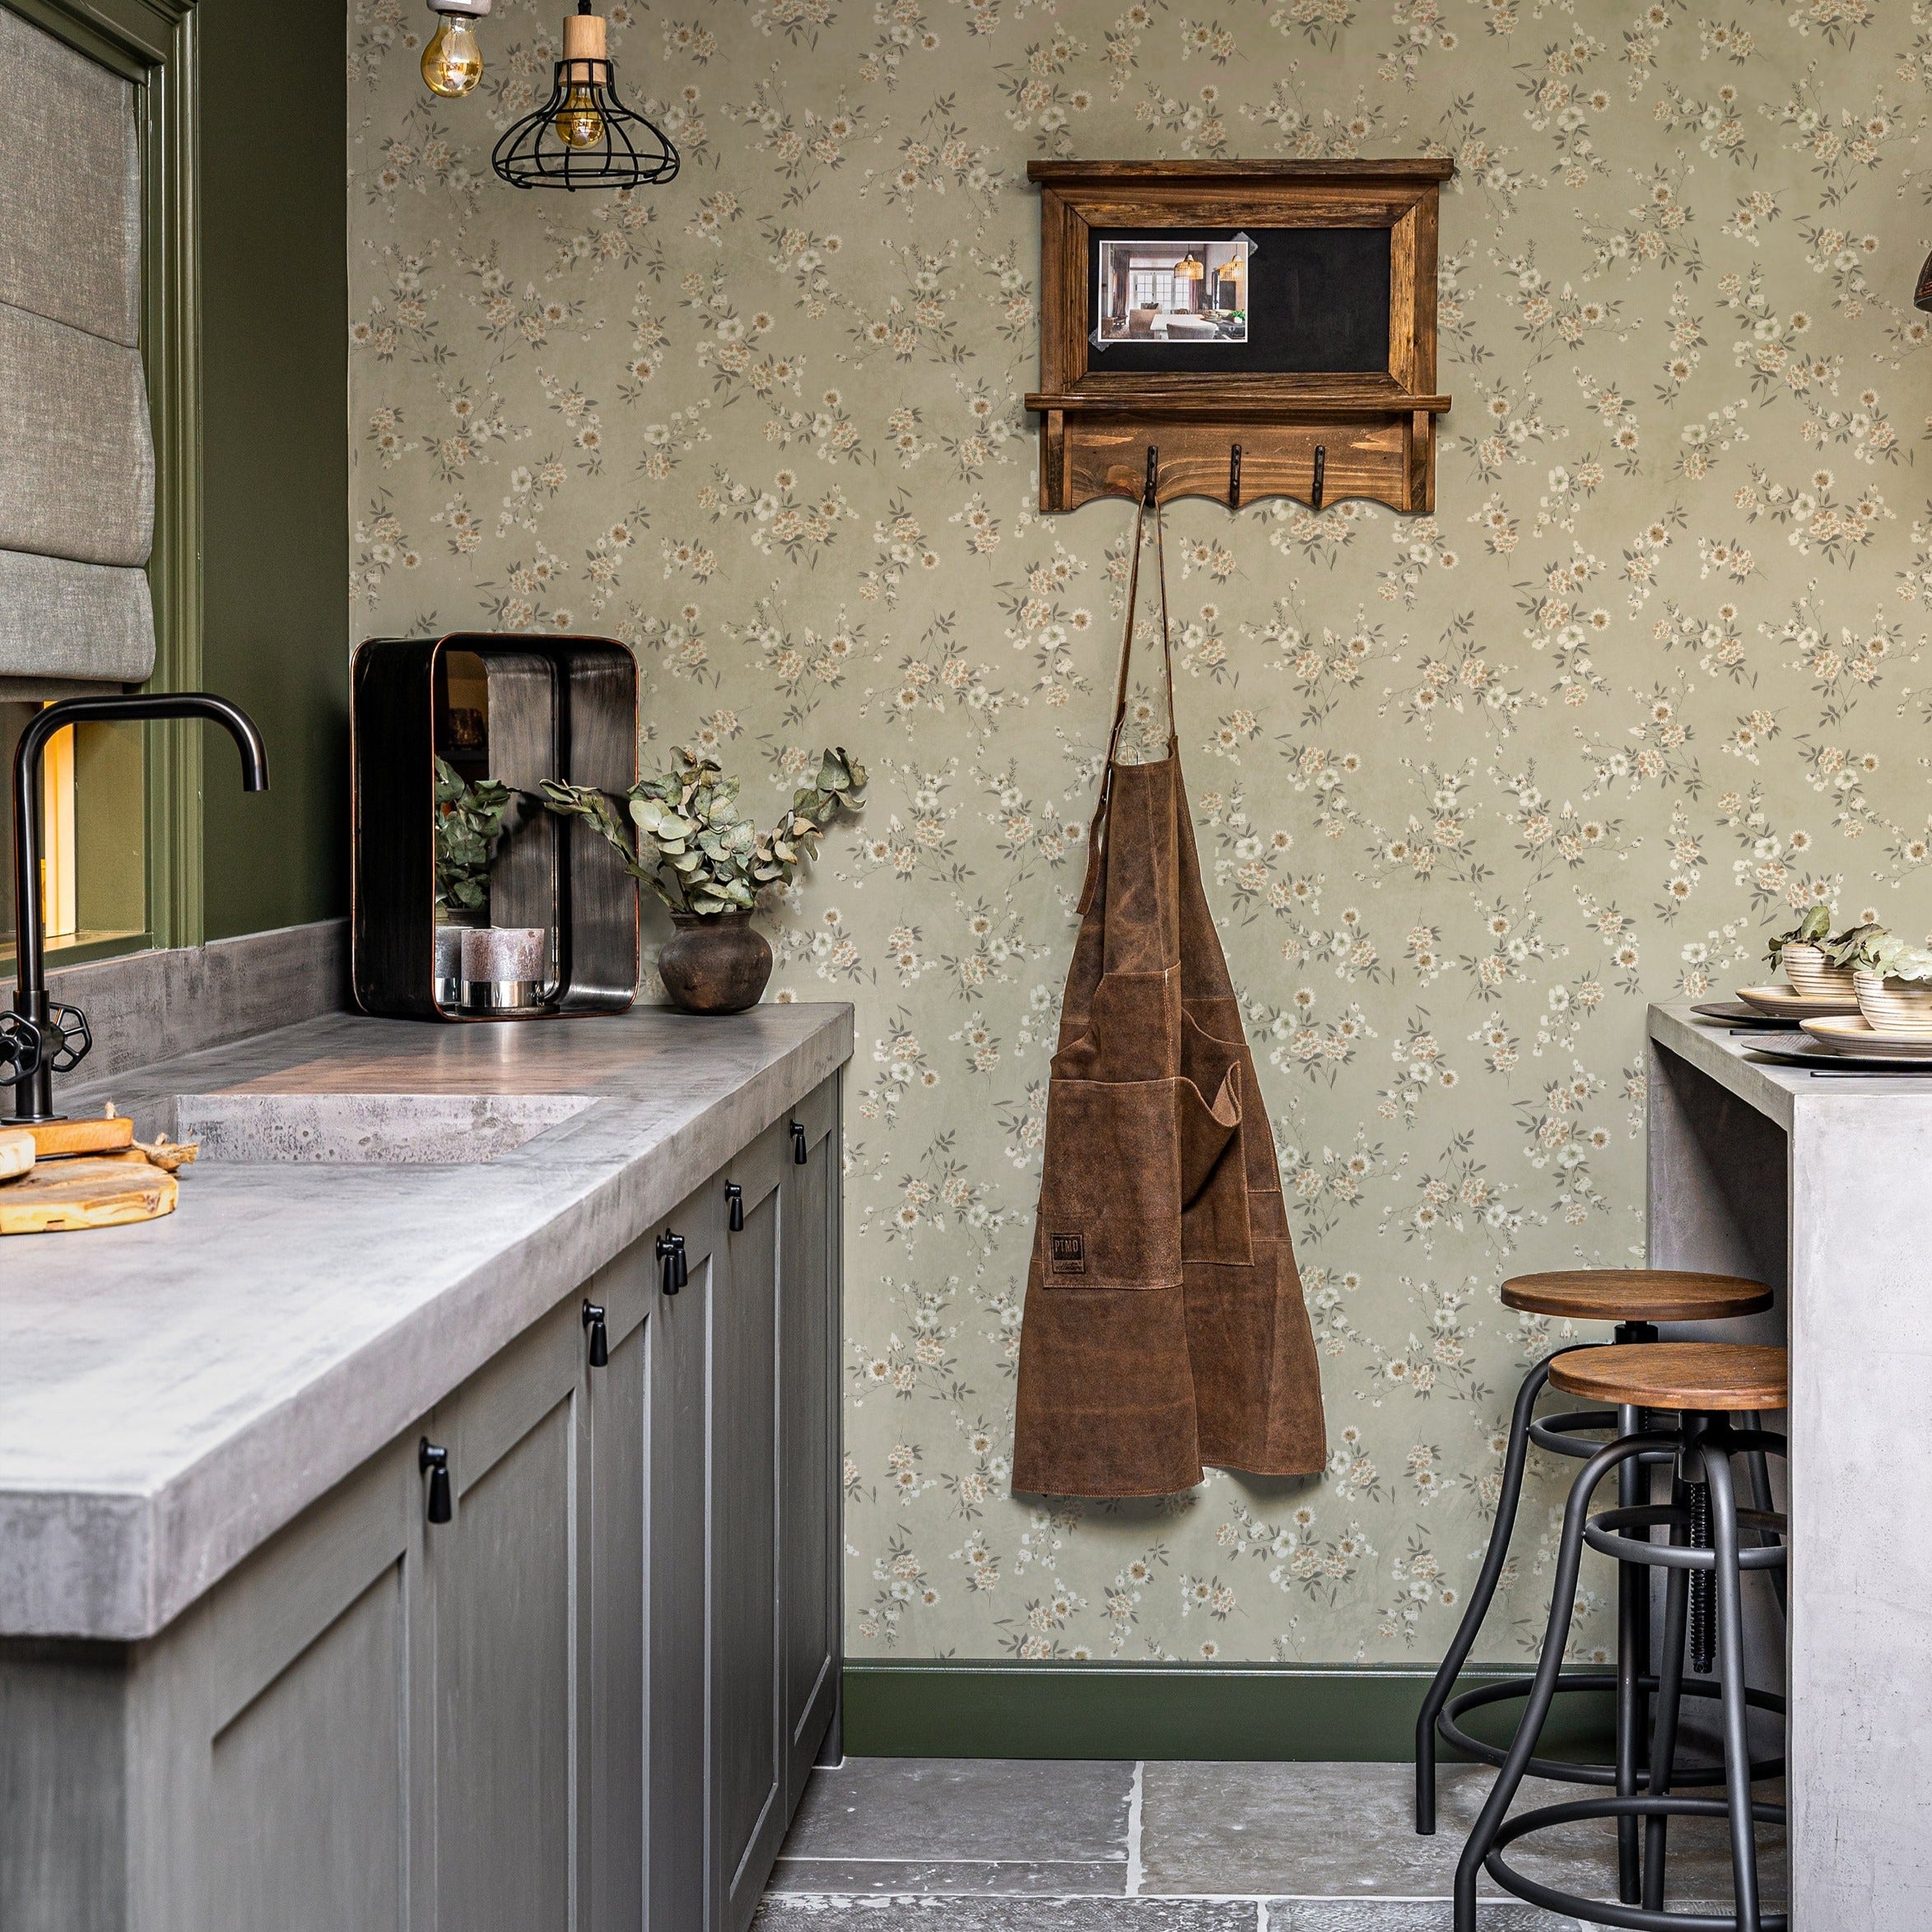 A close-up of the Classic Floral Wallpaper in a kitchen setting, emphasizing the wallpaper's ability to blend seamlessly with modern and vintage elements. The earthy green tones and floral pattern create a warm and welcoming ambiance, harmonizing with the kitchen’s contemporary fixtures and natural accents.